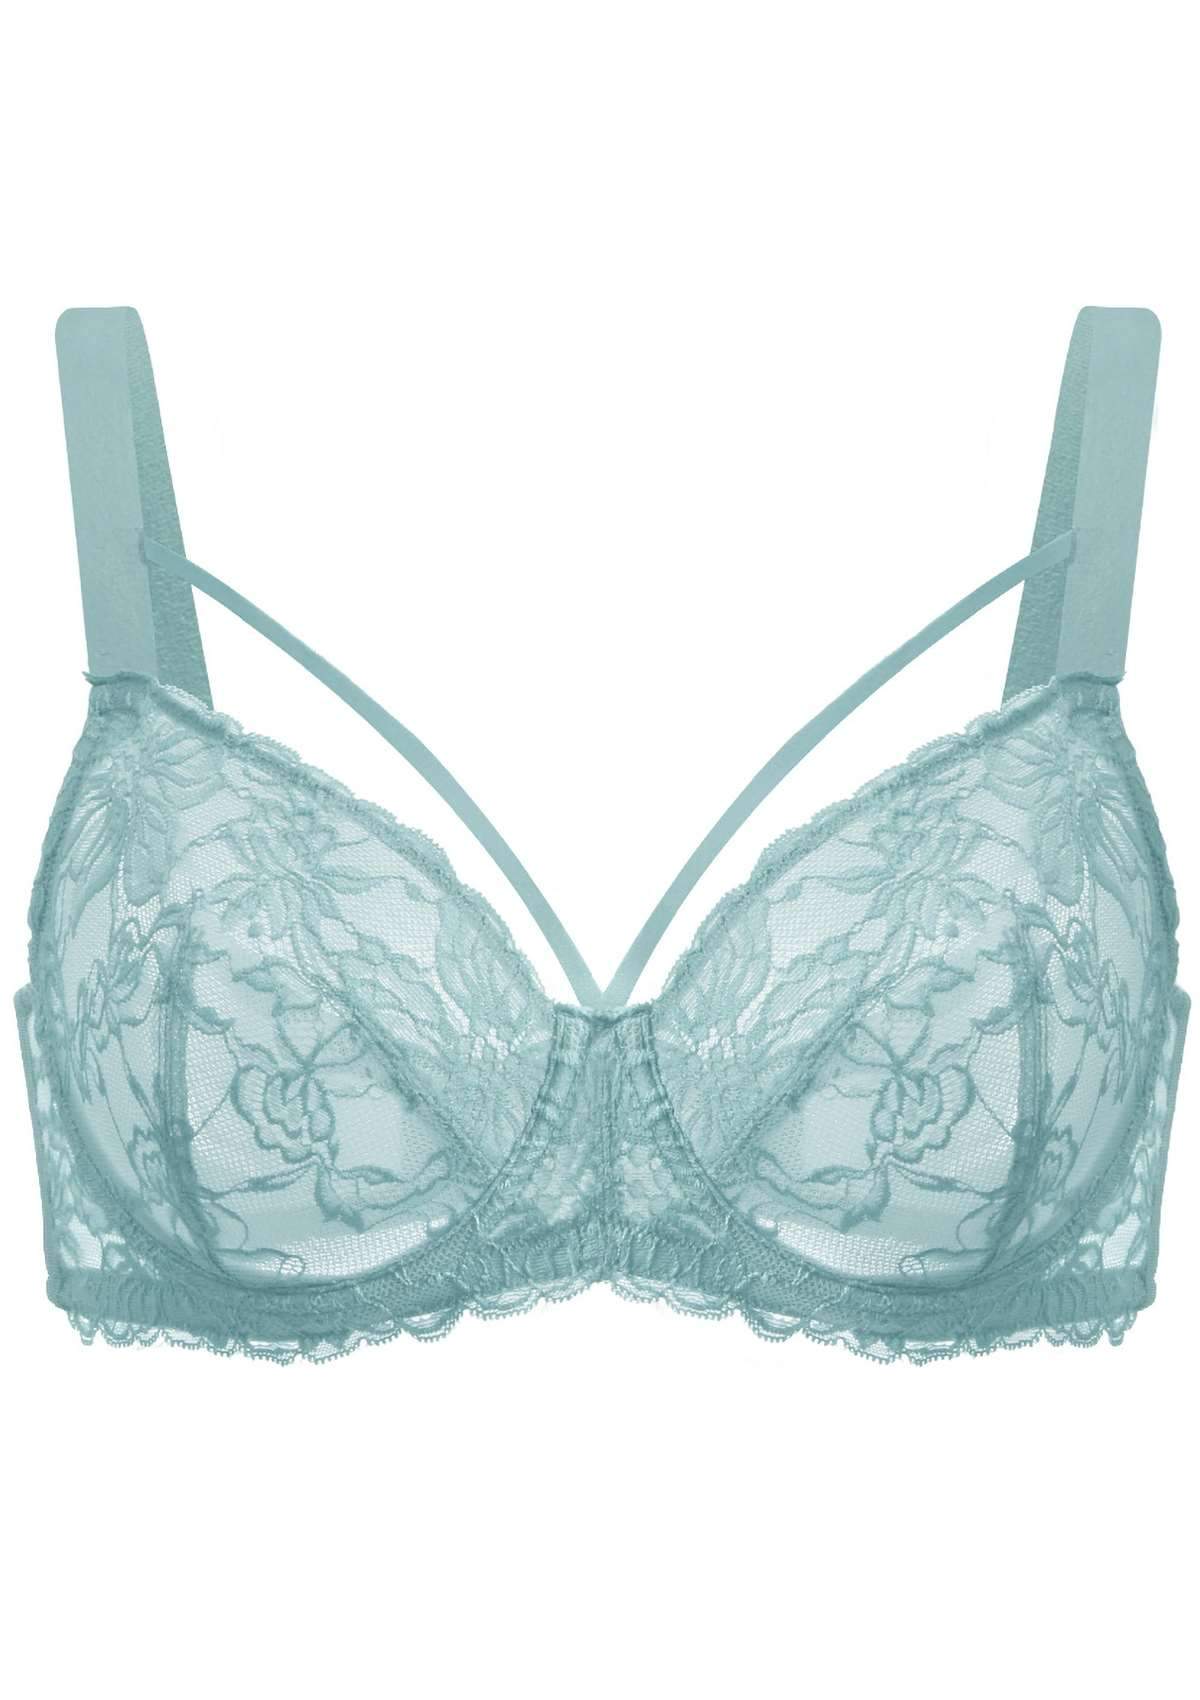 HSIA Pretty In Petals Unlined Lace Bra: Comfortable And Supportive Bra - Pewter Blue / 38 / DDD/F